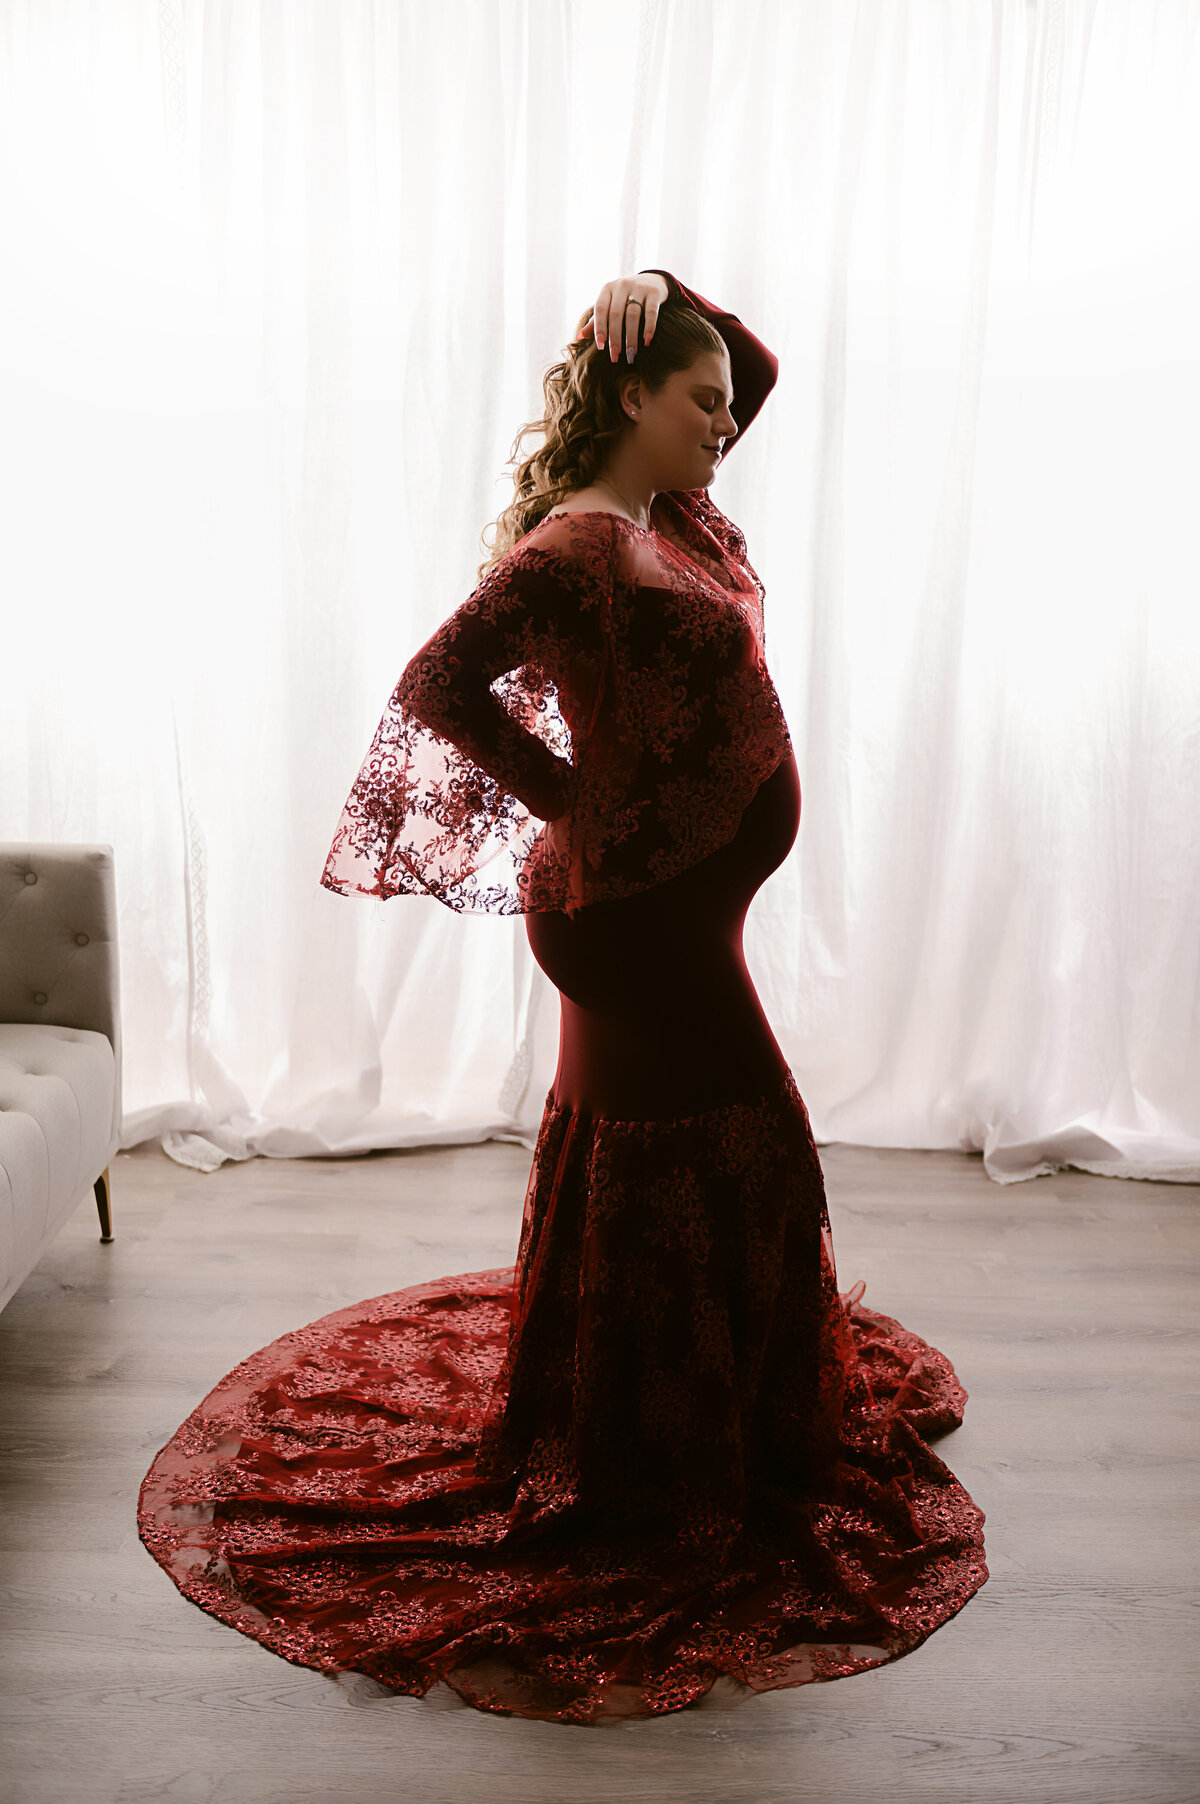 High Fashion | Styled | Romantic | Intimate | Modest Gowns | slit| Rust | Maternity | Professionally Posed | Photo Session | Pregnancy Photos